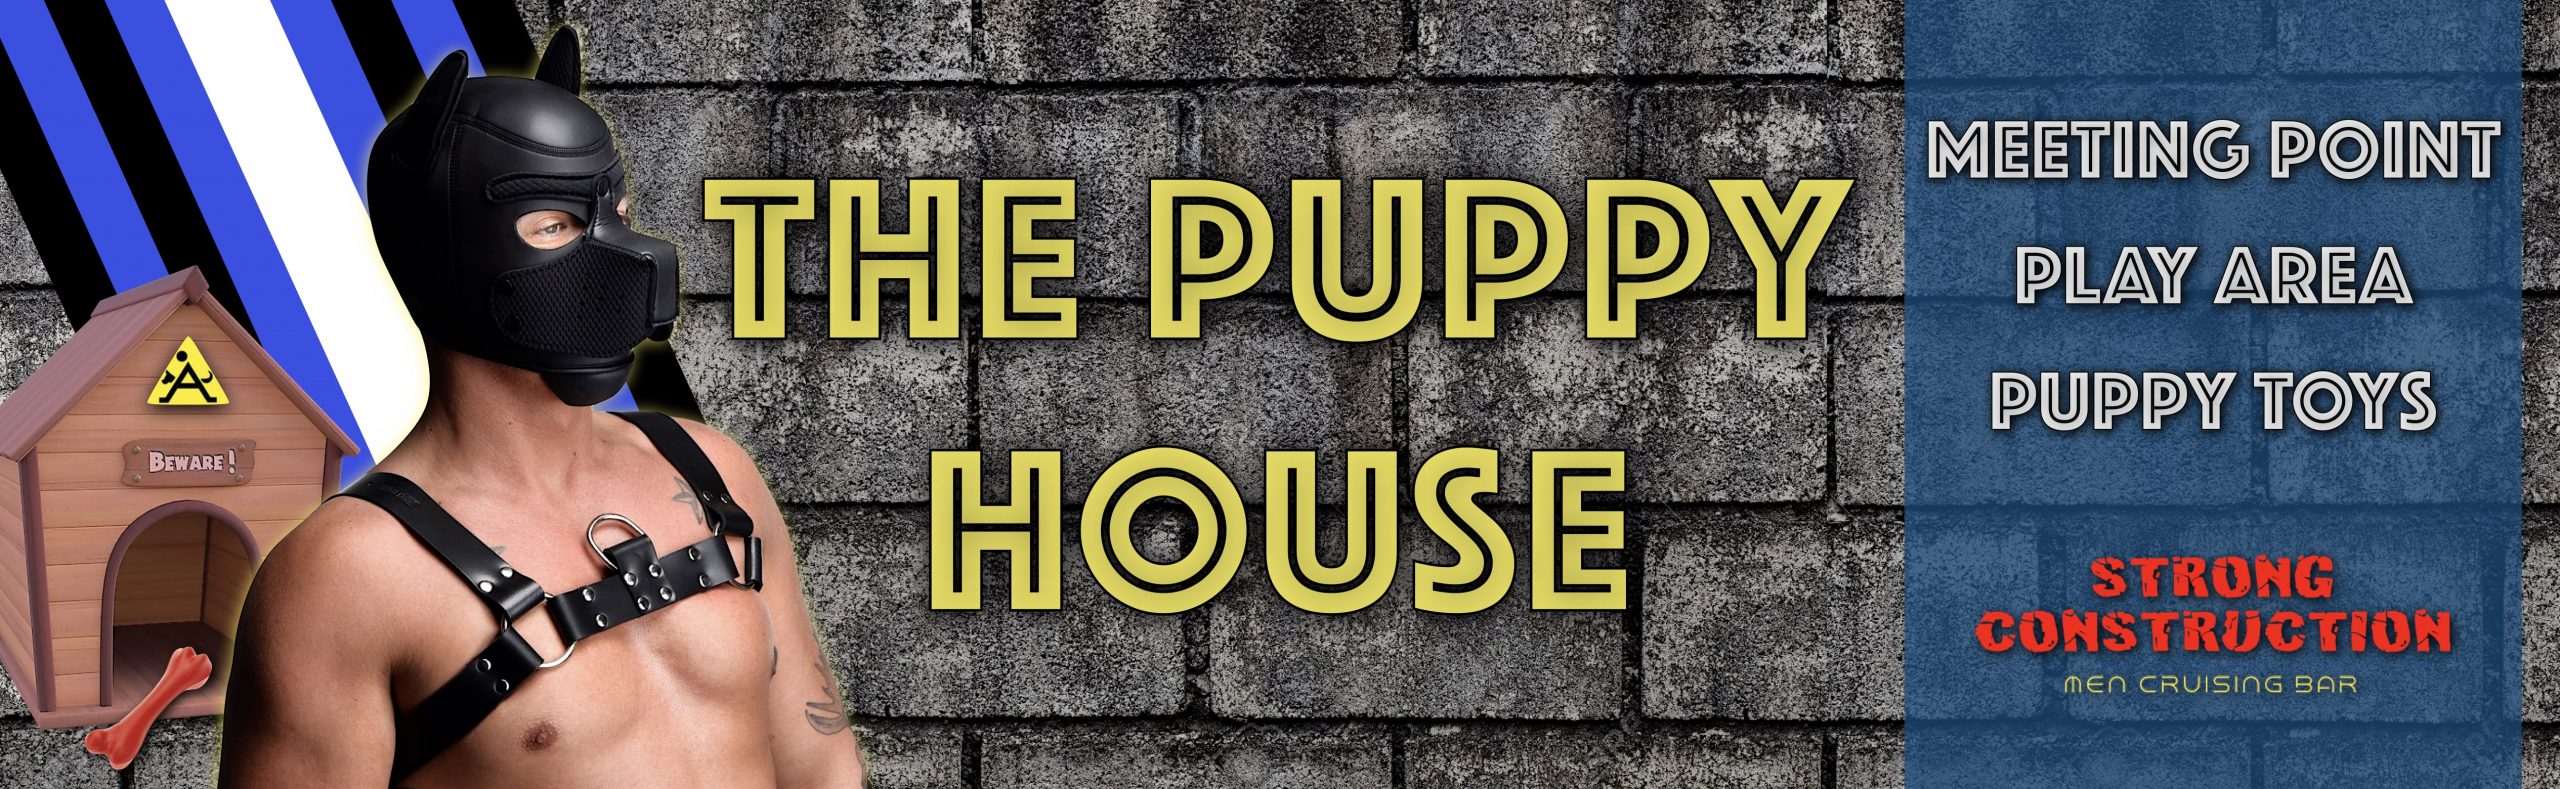 The Puppy House